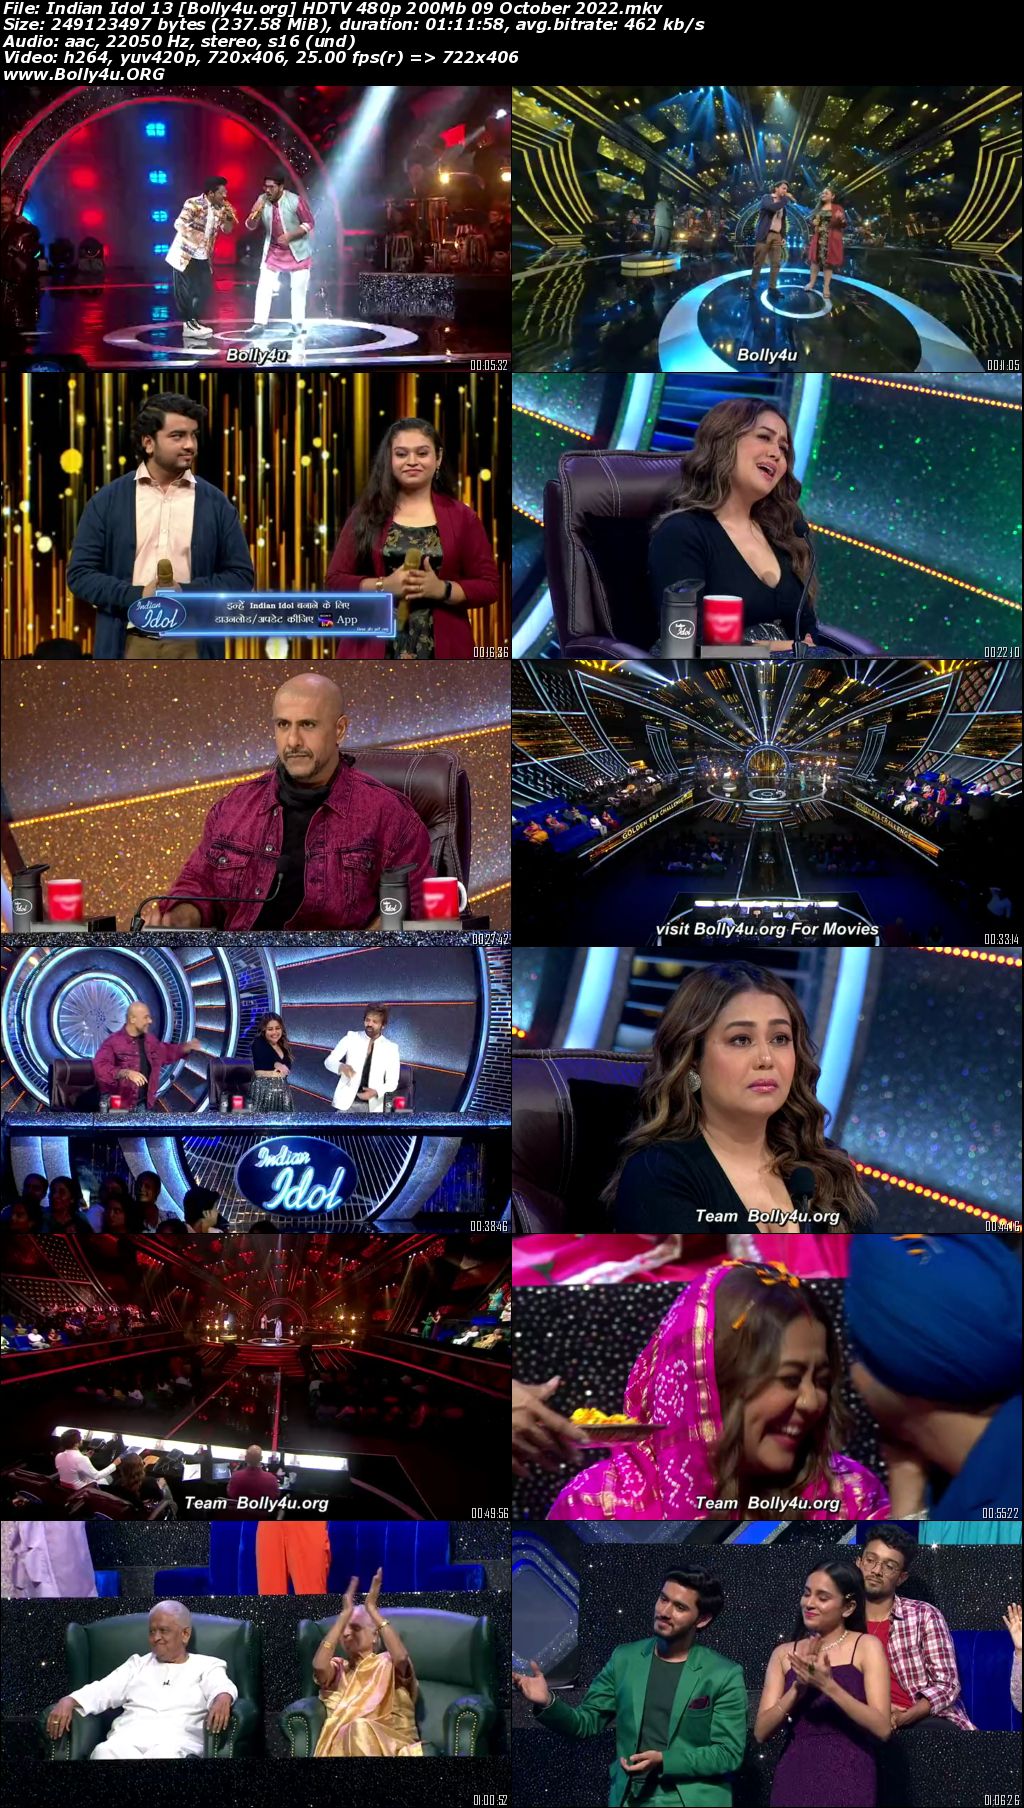 Indian Idol S13 HDTV 480p 200Mb 09 October 2022 Download